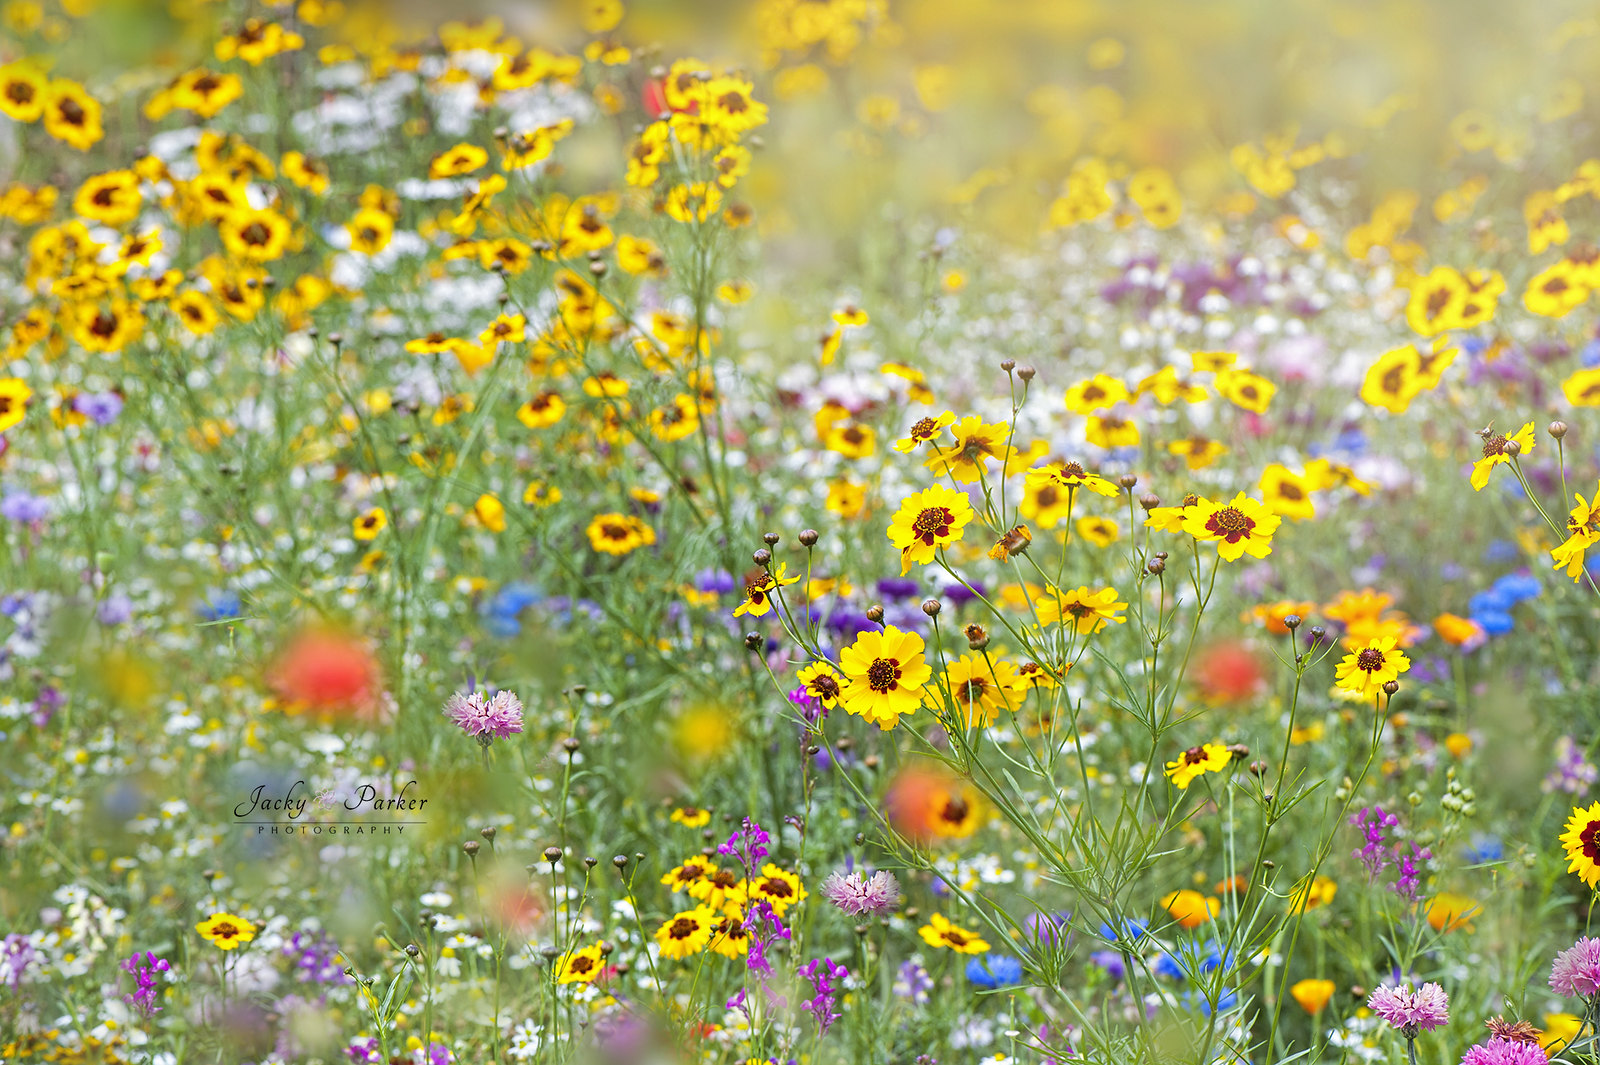 Wildflowers at Wisley by Jacky Parker